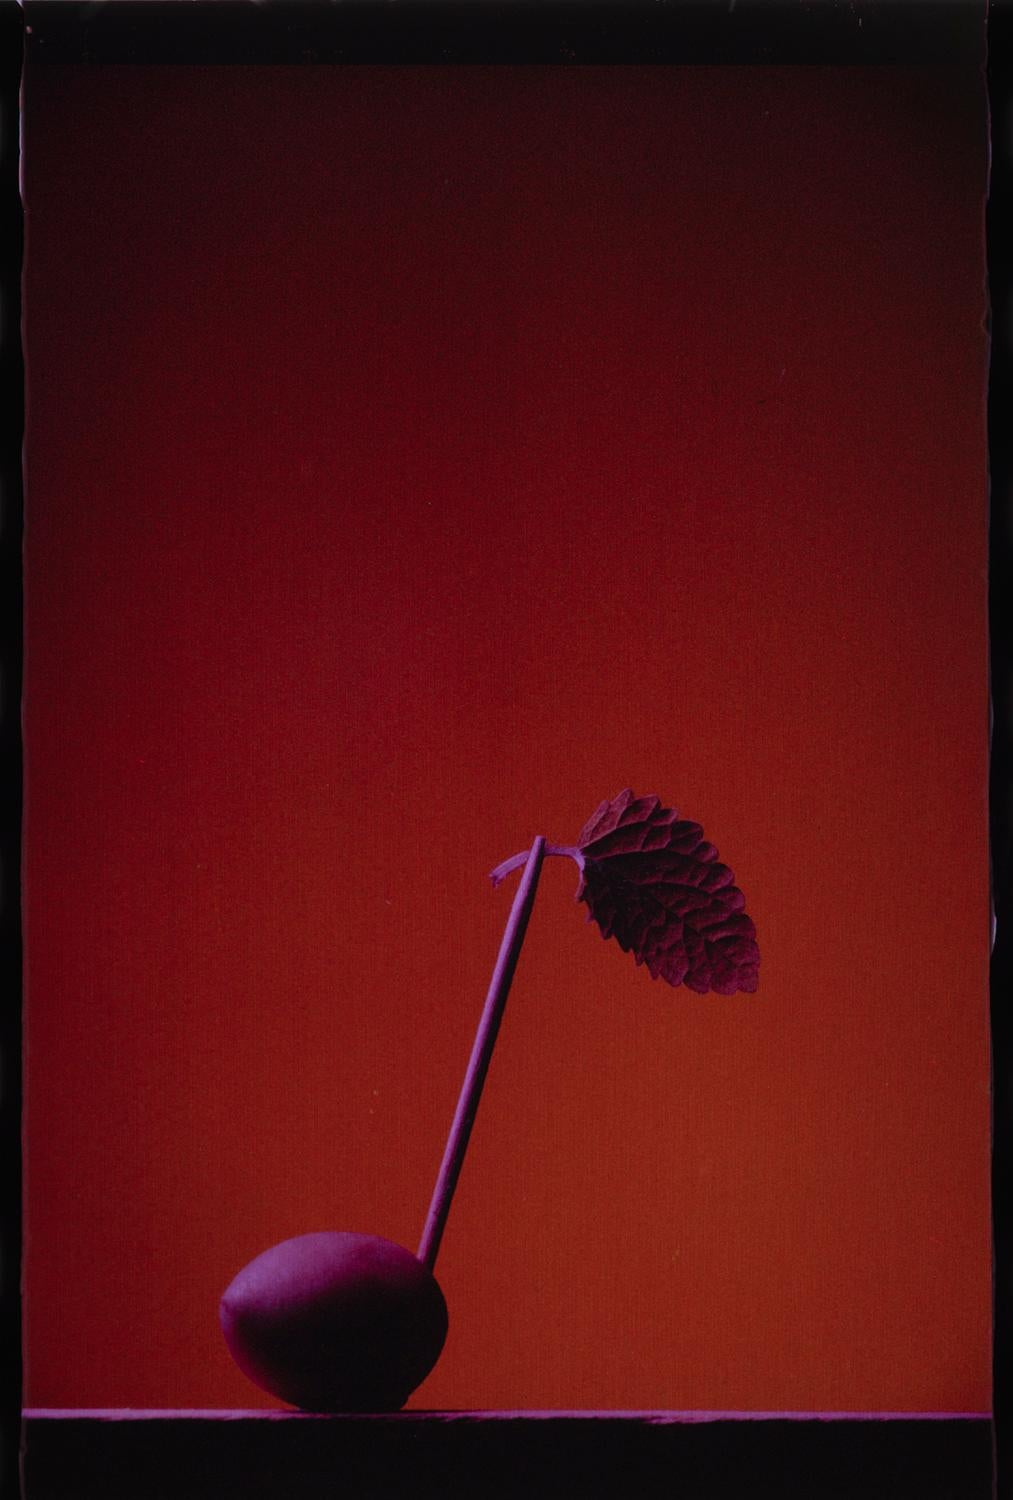 Purple Note
Edition of 25
signed and numbered by the artist

This still-life picture of a Music Note consists of an olive, mint leaf and a toothpick. It was shot on Polaroid Polachrome Transparency Film in the 80s.

JJK is a pseudonym for one of the